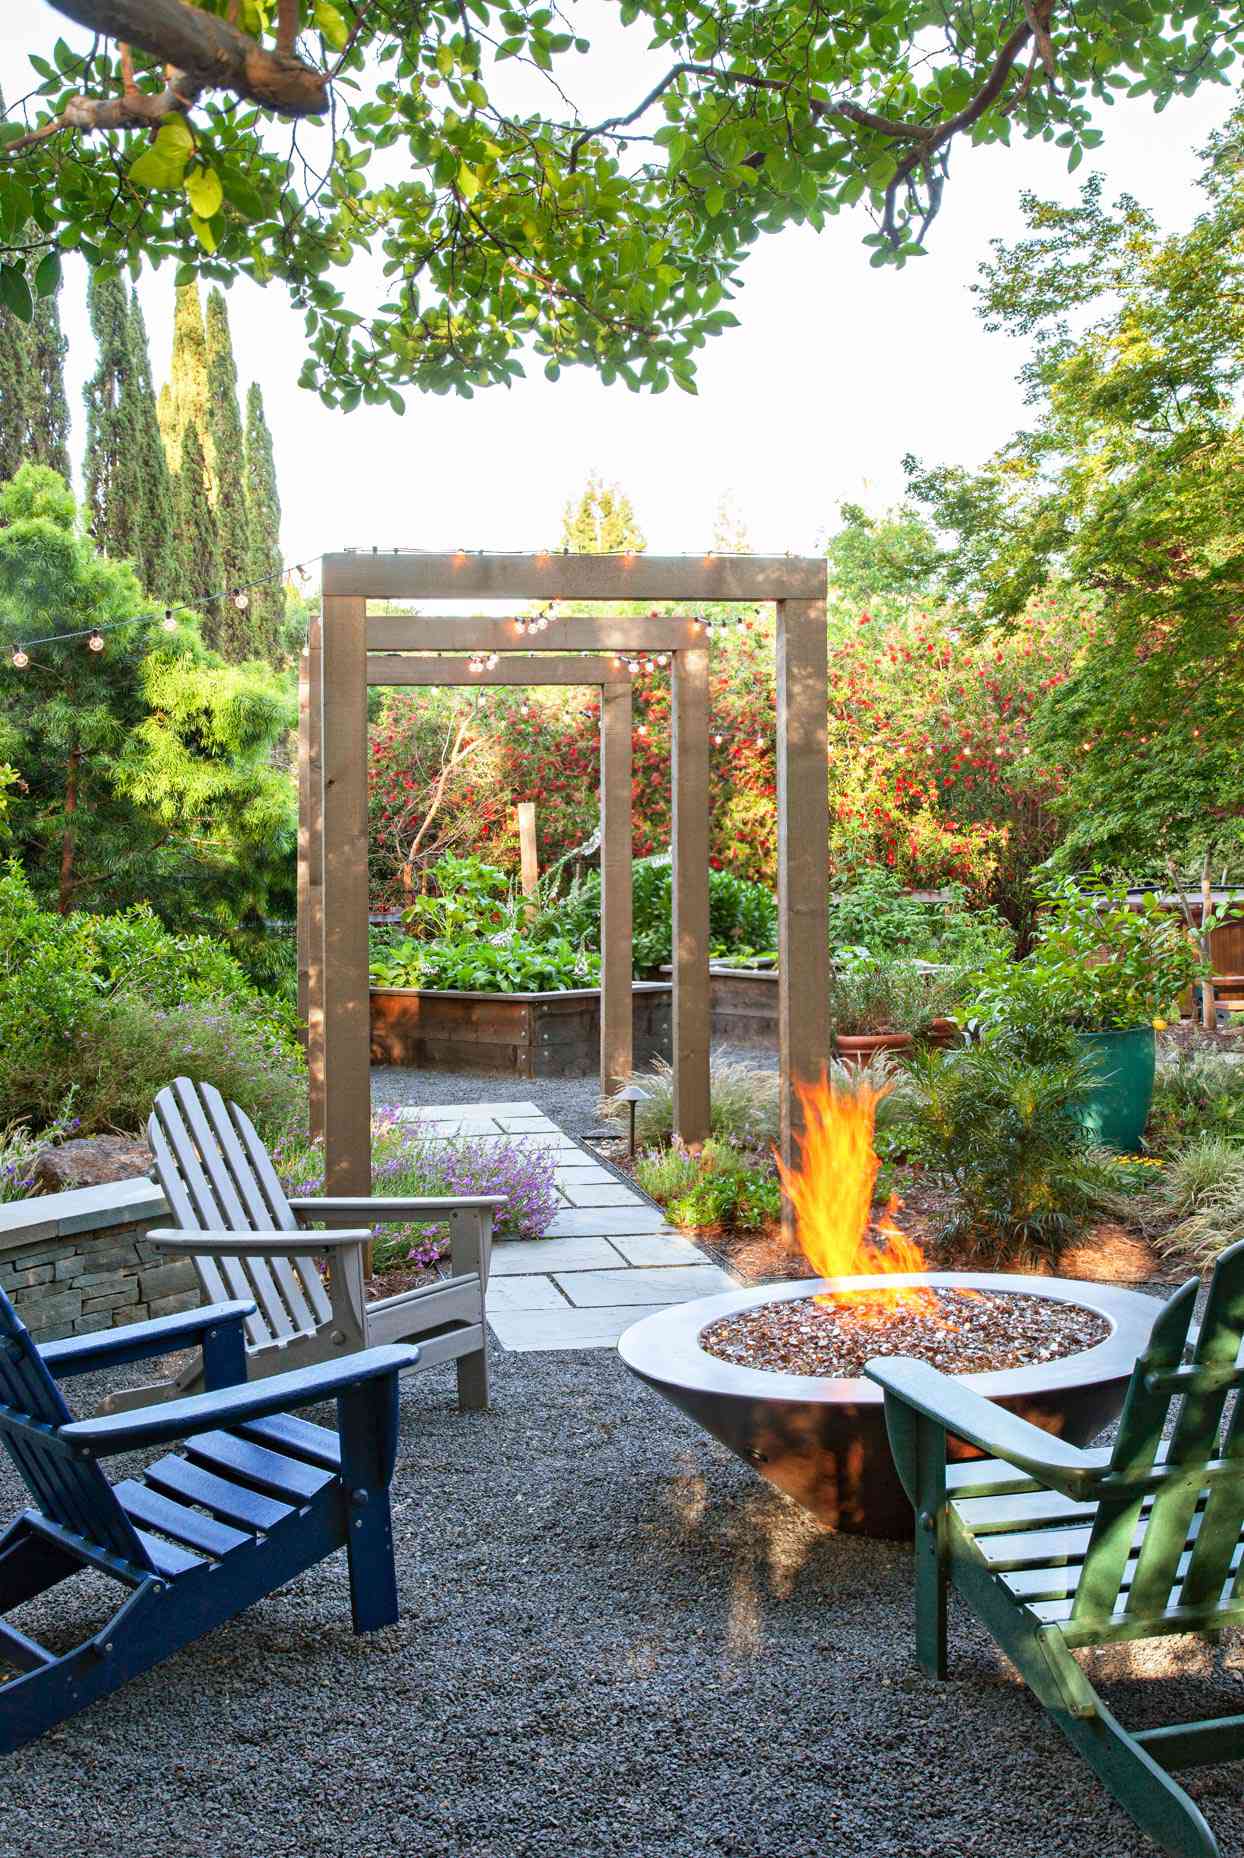 fire pit area with wooden arches